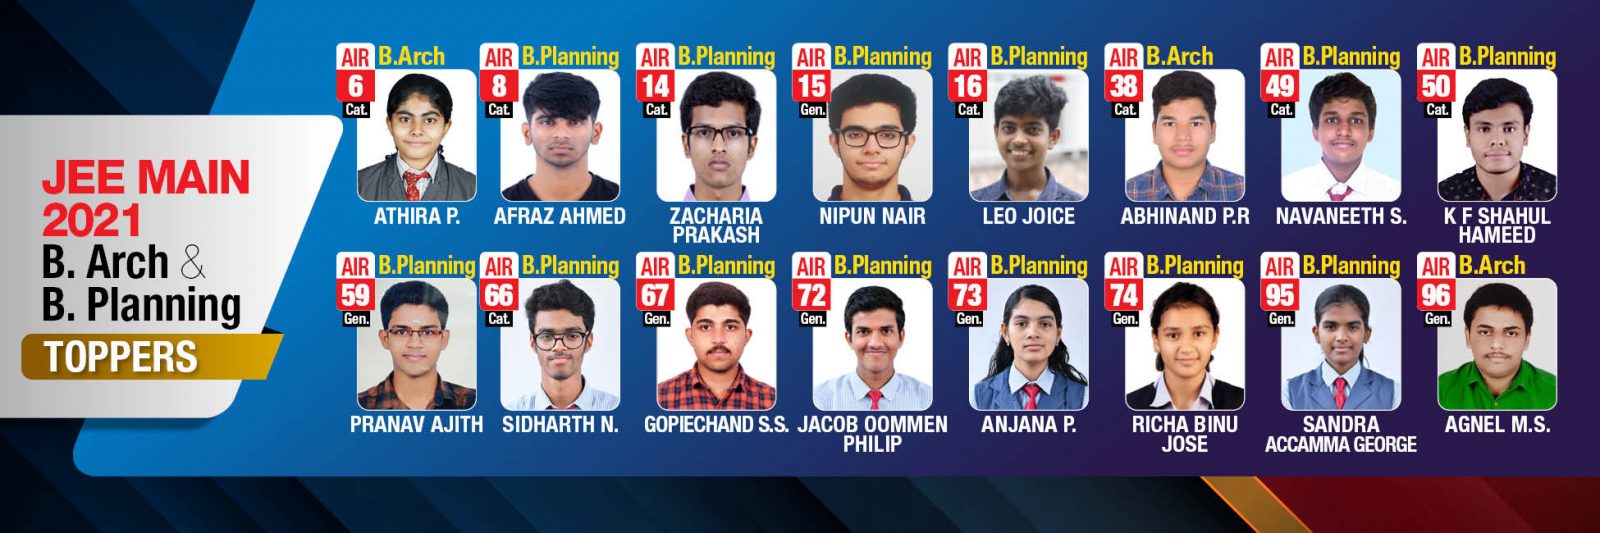 JEE Main 2021 - B. Arch & B. Planning Toppers